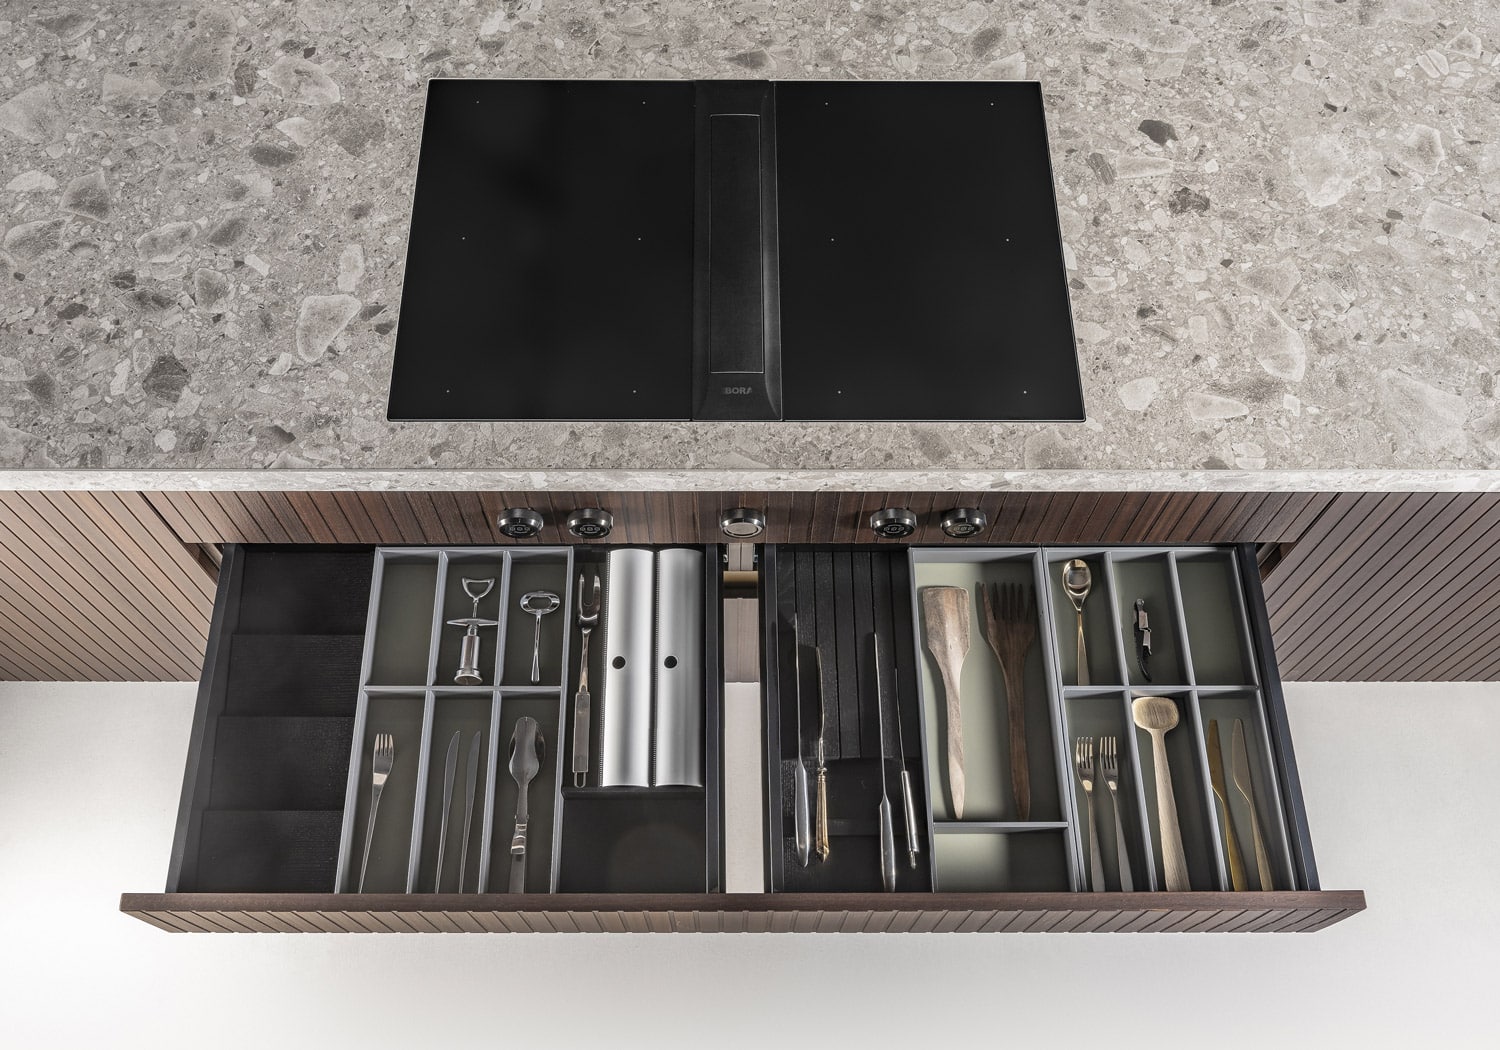 Custom inserts in aluminum organize the storage space inside drawers and deep baskets. 